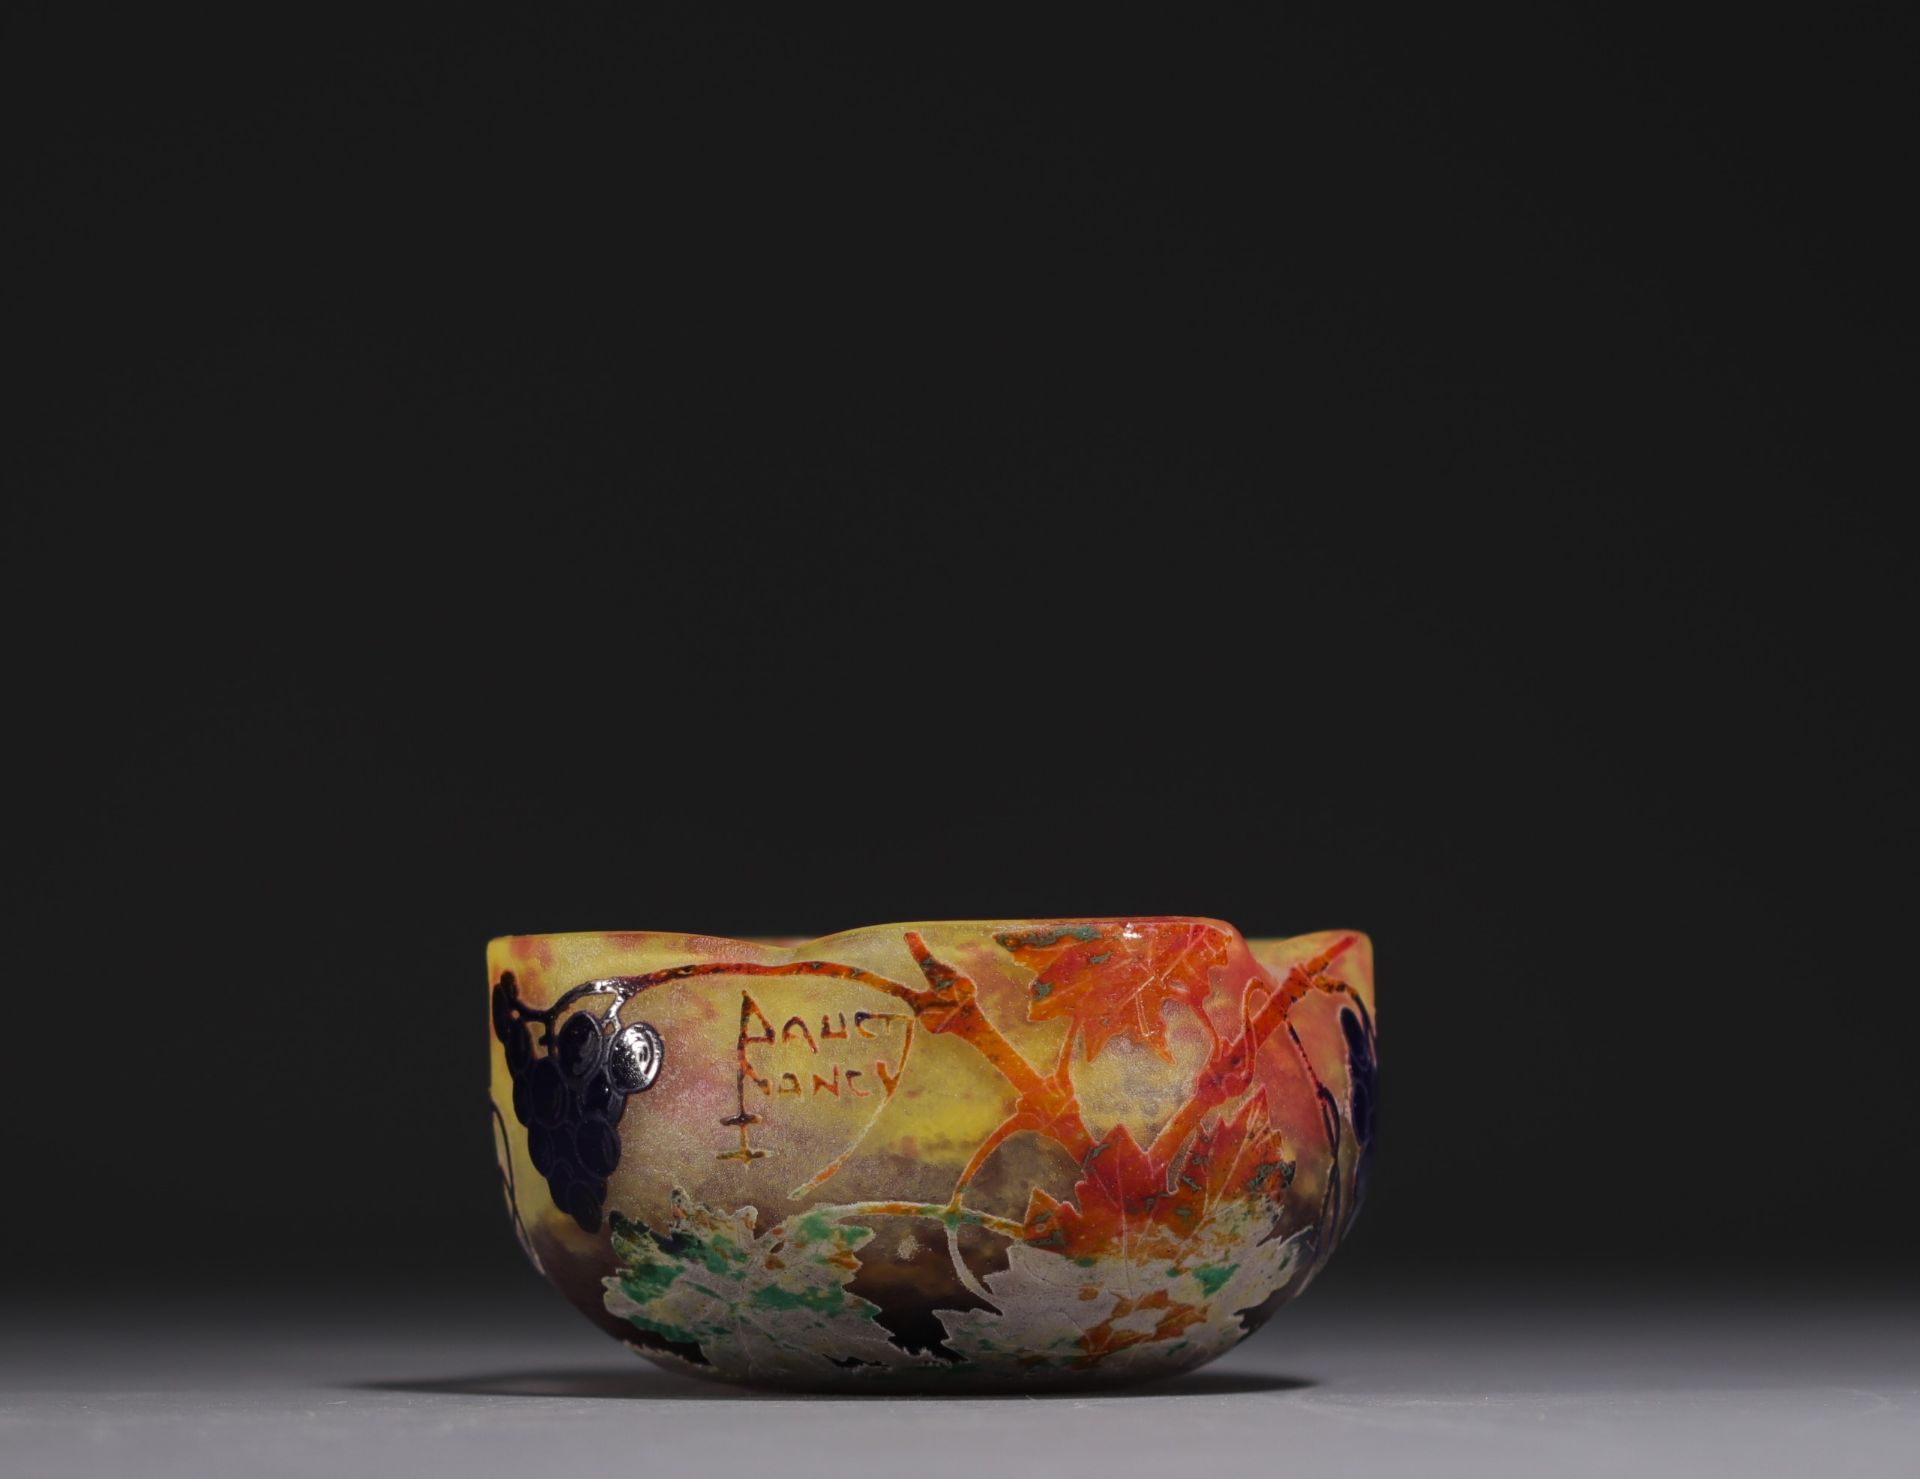 DAUM Nancy - Four-lobed bowl in acid-etched multi-layered glass decorated with bunches of grapes, si - Image 2 of 4